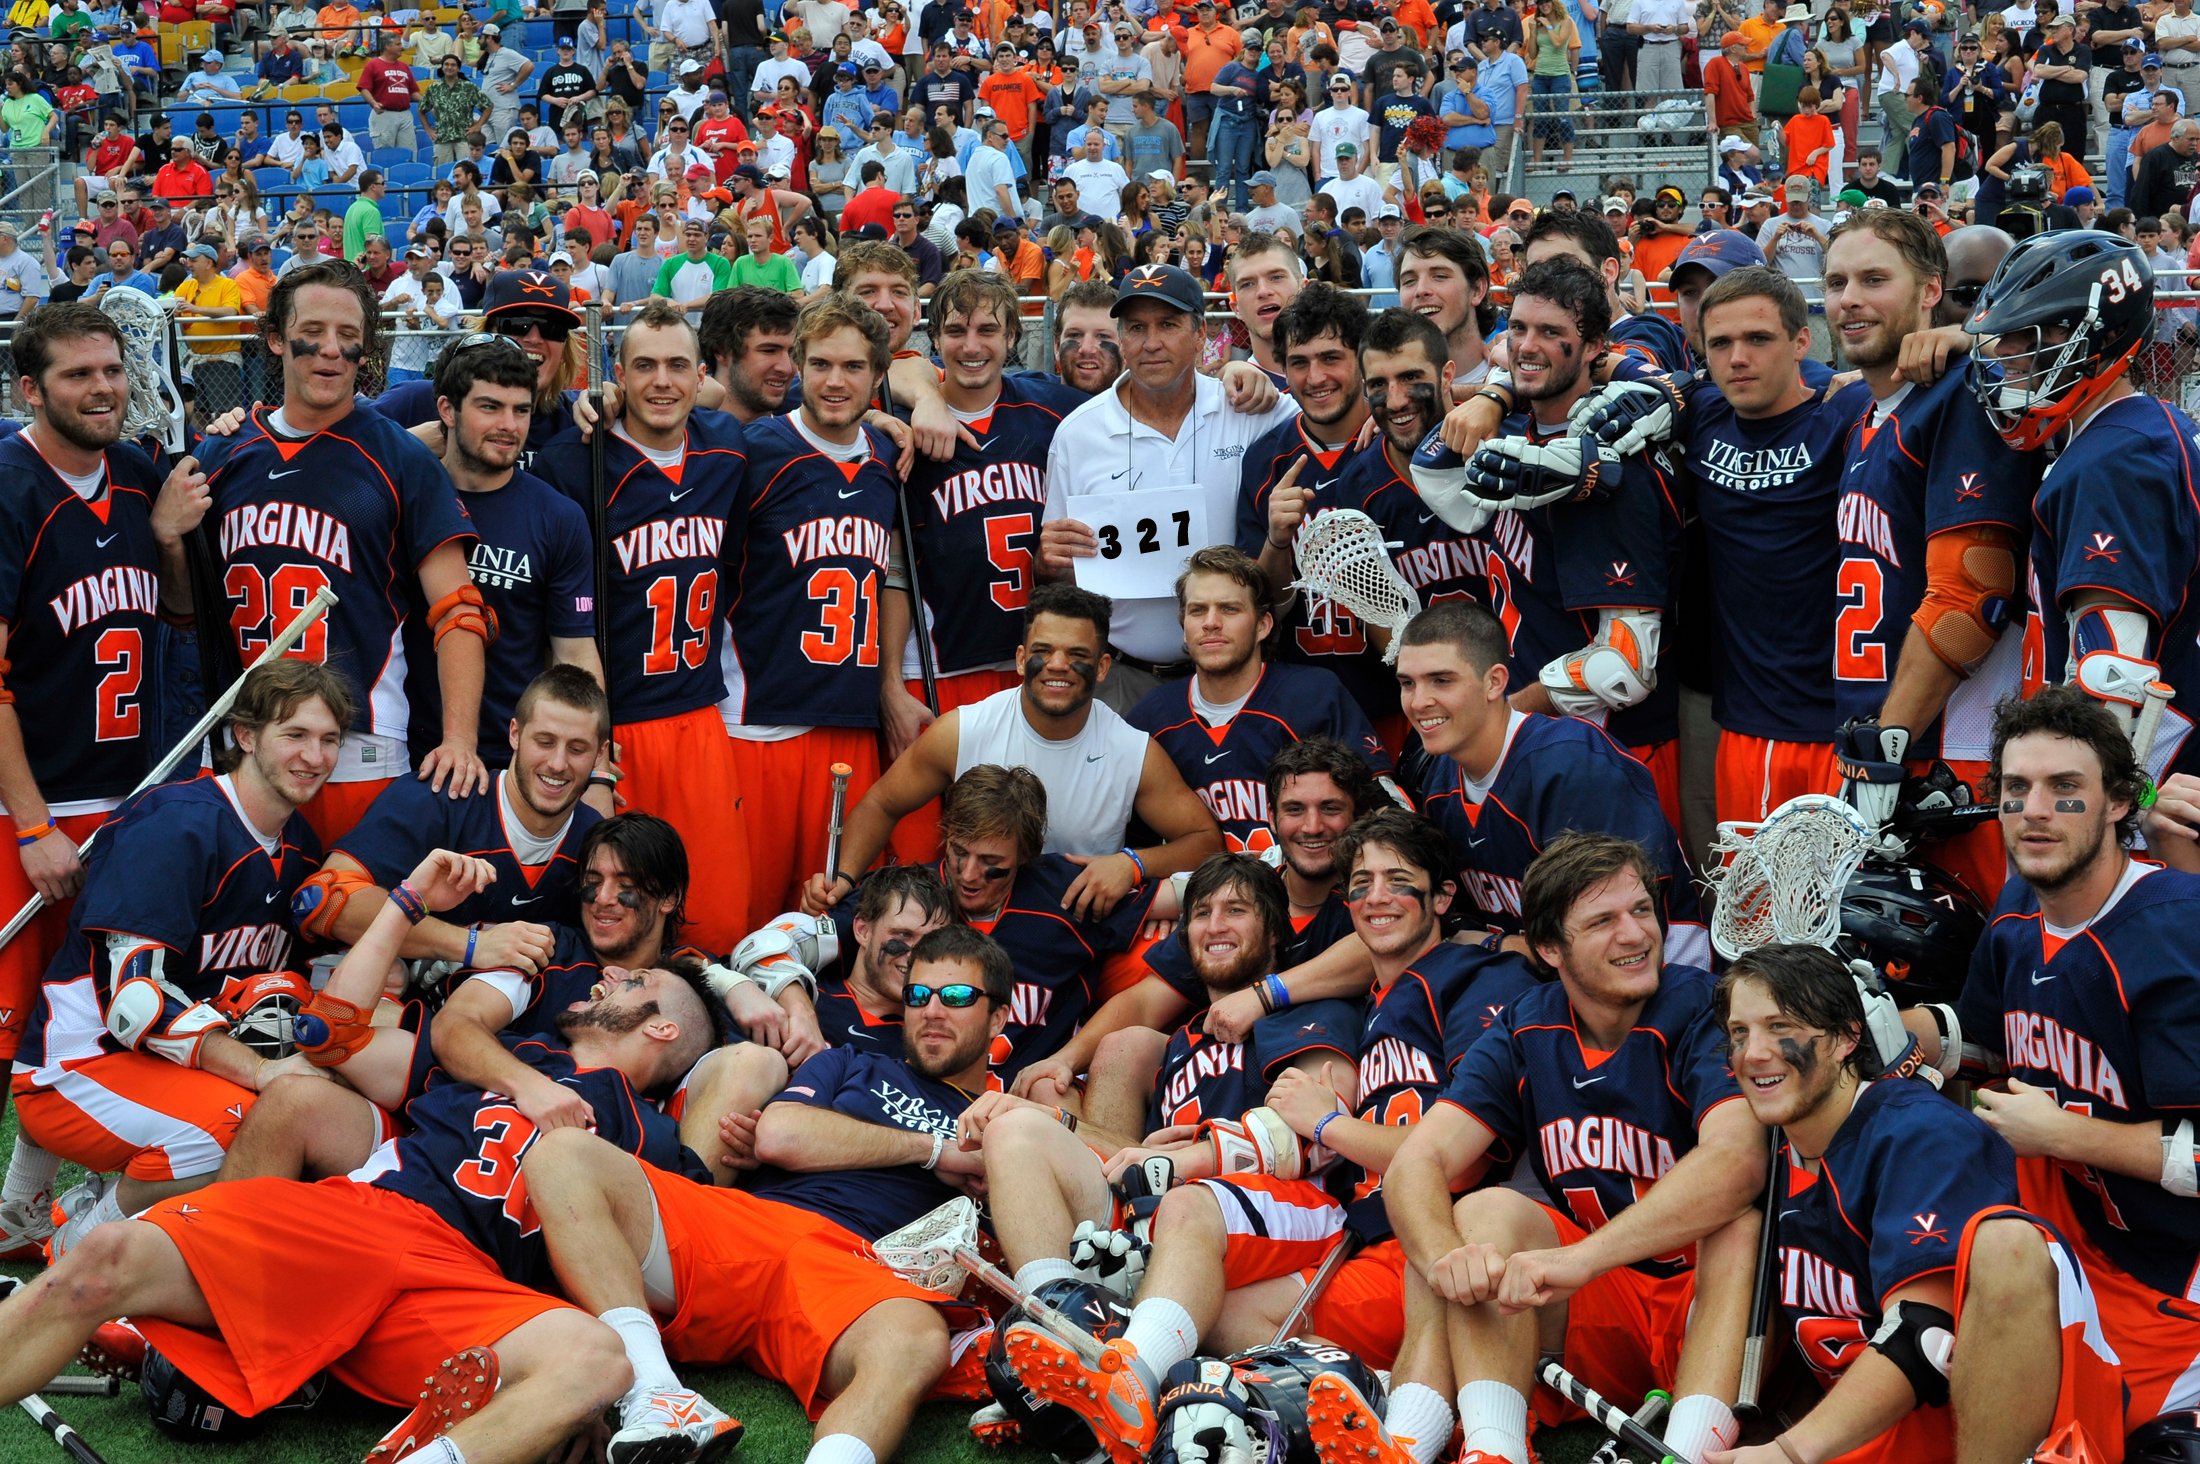 UVA Men's Lacrosse Team Advances to Final Four with 13-9 Win - WVIR